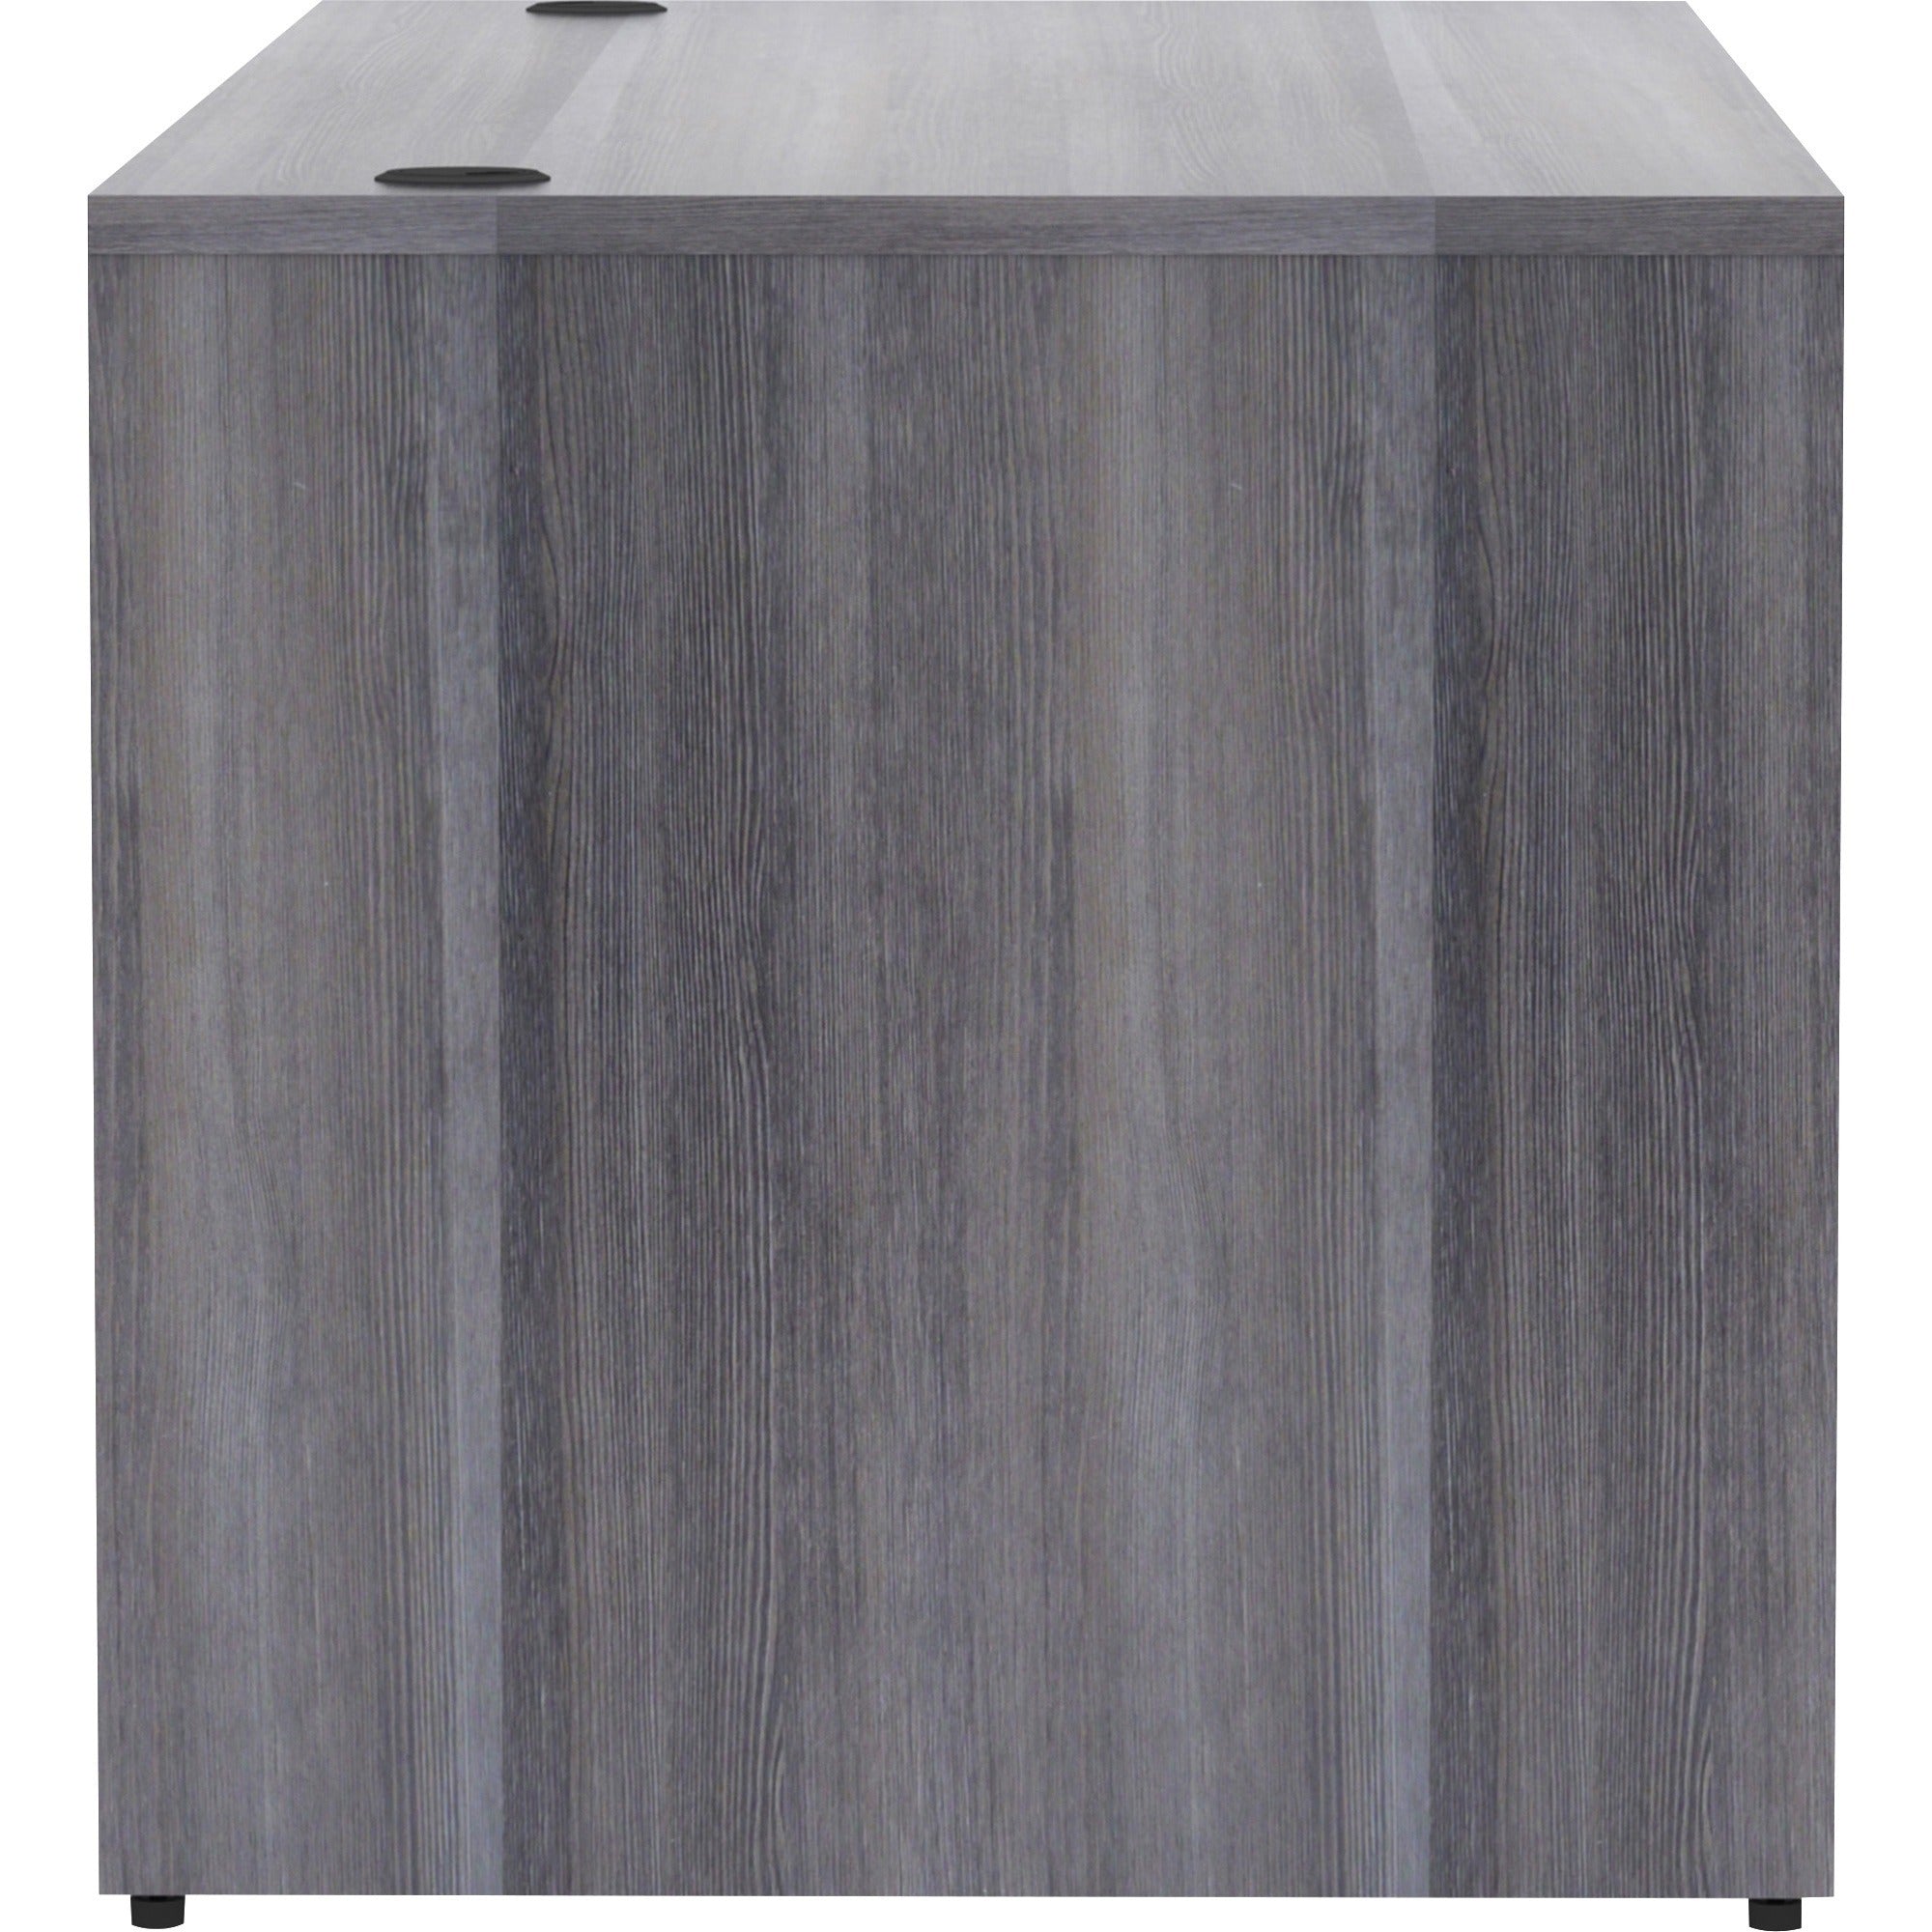 lorell-essentials-series-rectangular-desk-shell-72-x-30295--1-top-laminate-weathered-charcoal-table-top-grommet_llr69551 - 3